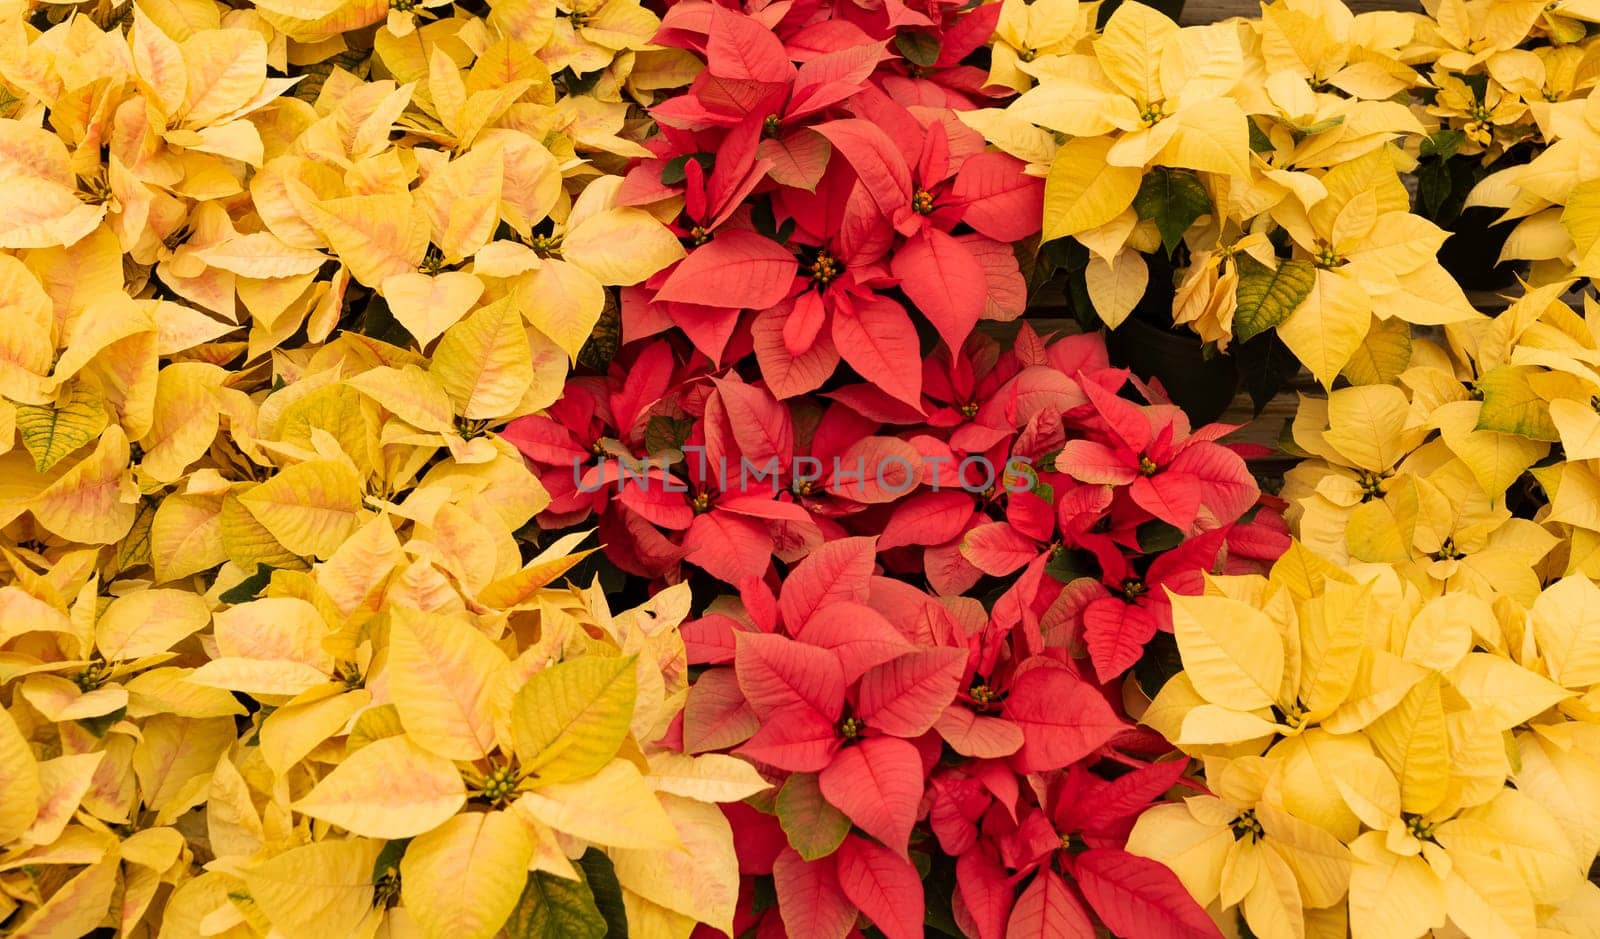 Yellow Eckespoint Poinsettia Freedom Marble, Eckespoint Classic Red Poinsettia Freedom Pink Plant and Potted Eckespoint Poinsettia Freedom White Flower. Floral Backdrop. Christmas Eve Plant